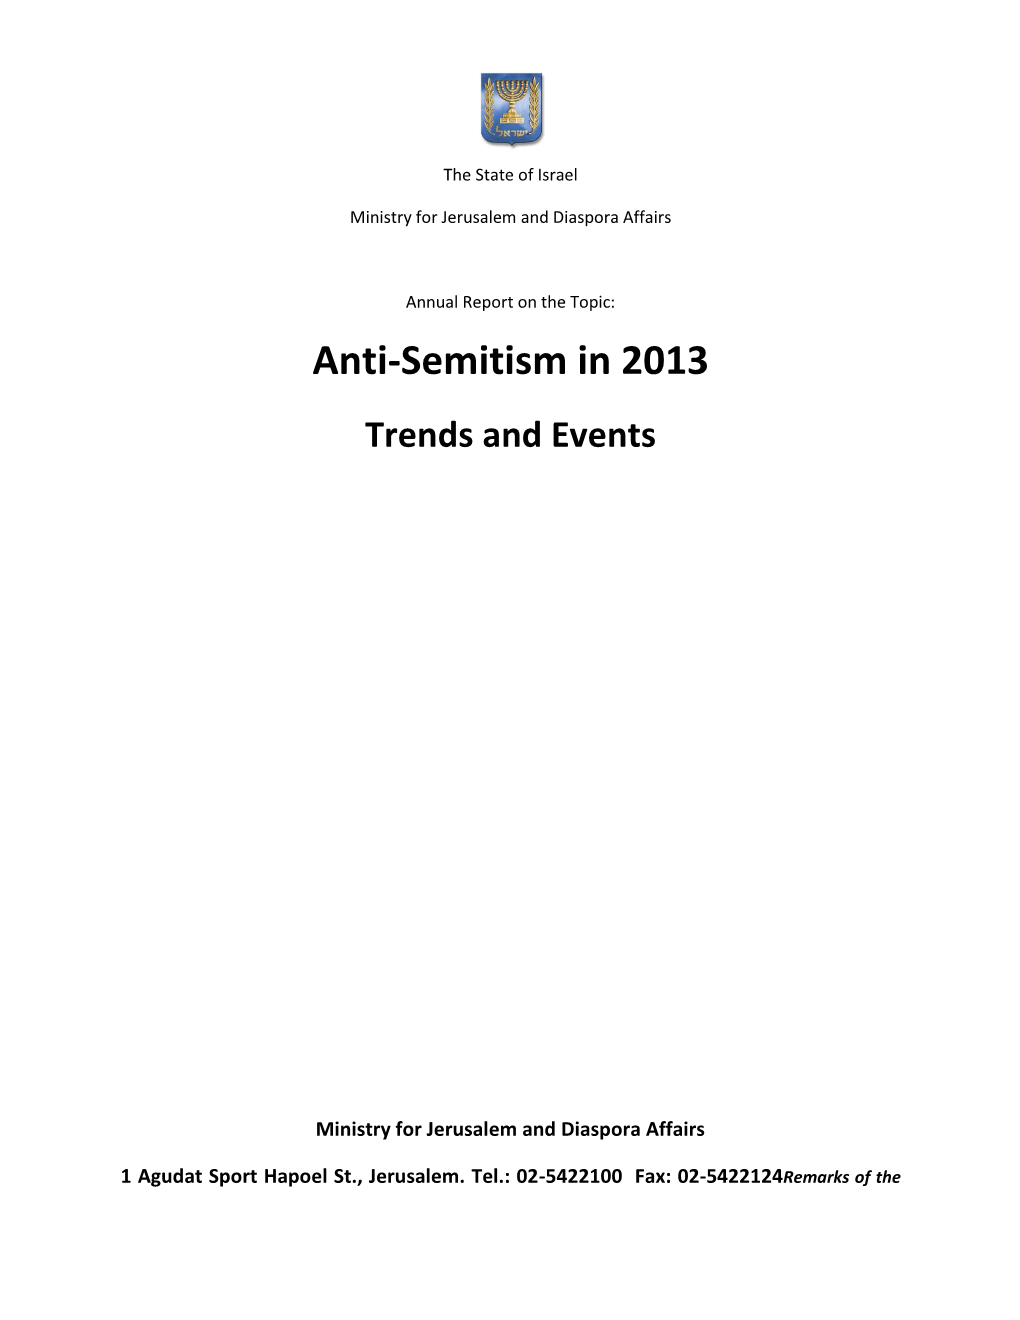 Anti-Semitism in 2013 Trends and Events